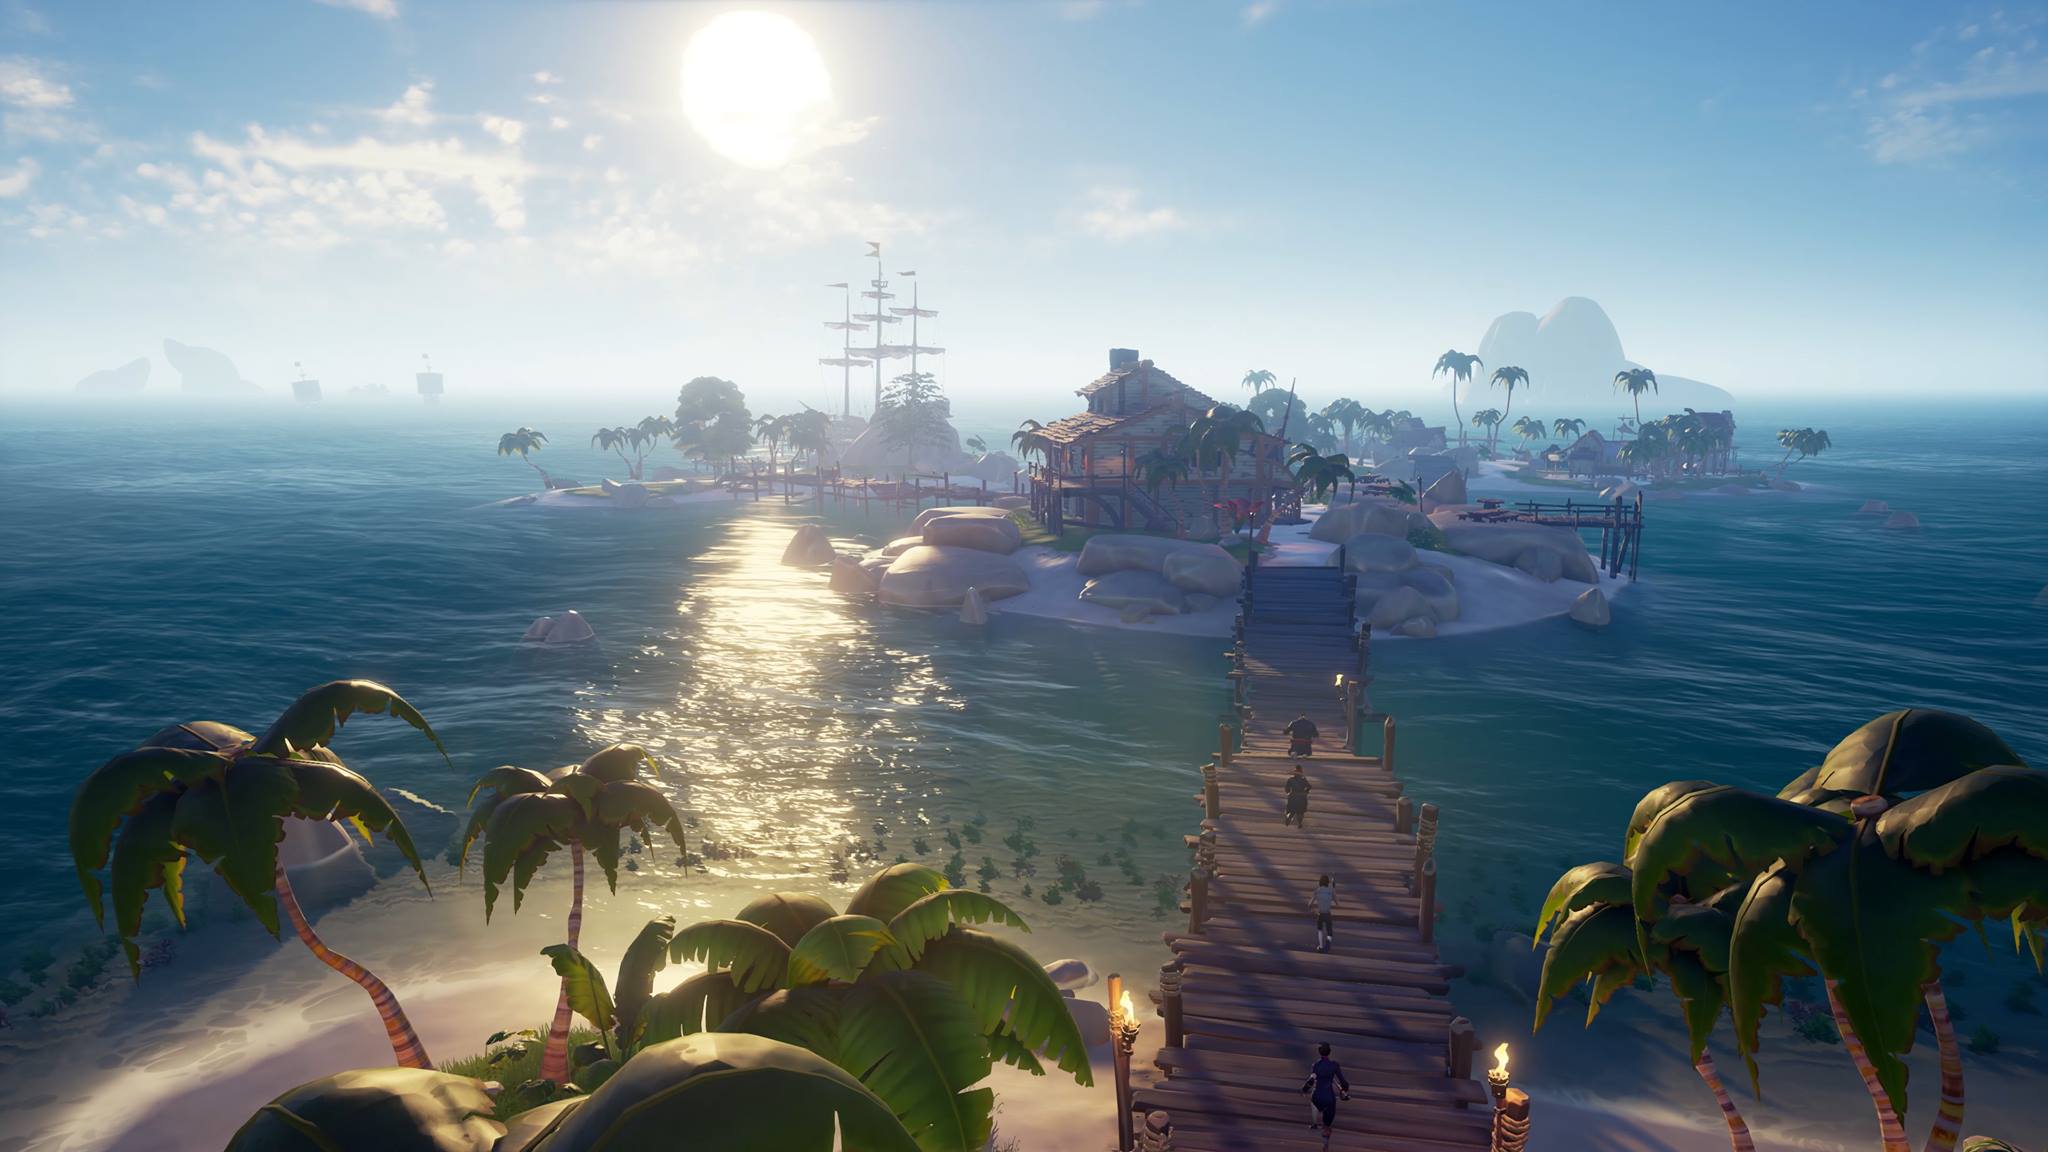 Sea Of Thieves | Island with people